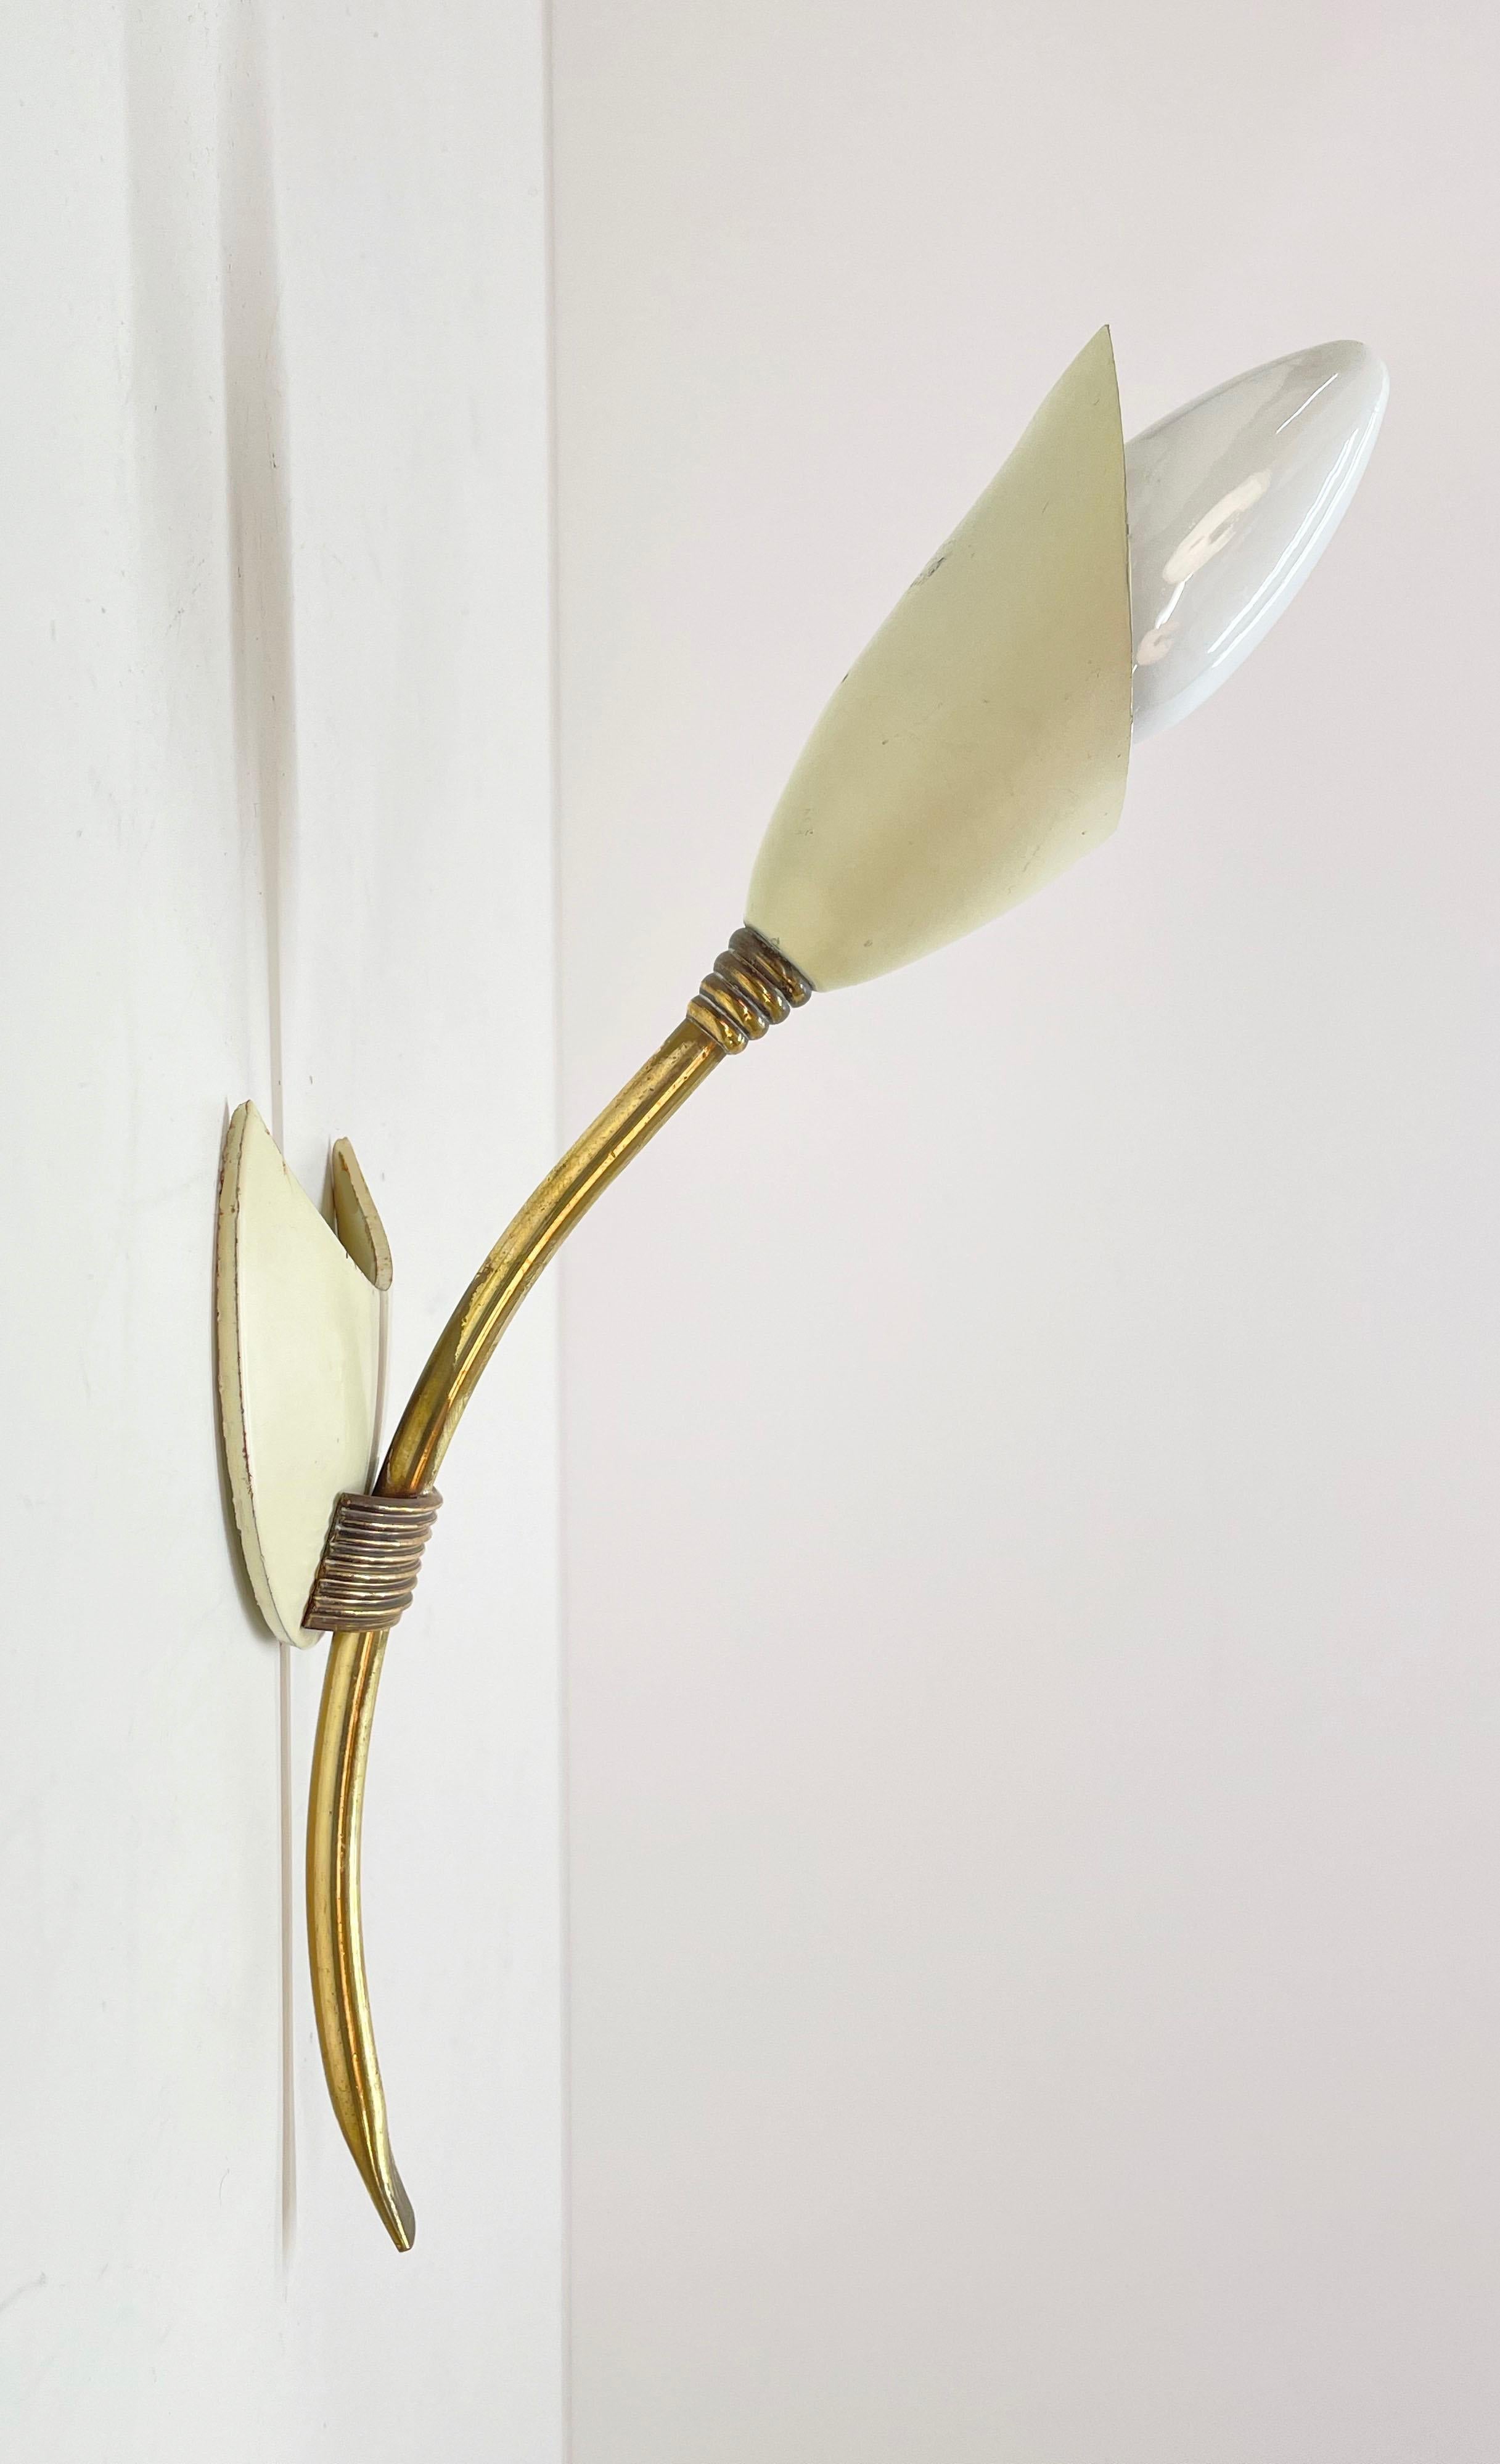 Pair of GCME Midcentury Brass and Enamelled Aluminum Italian Tulip Sconces 1950s For Sale 12